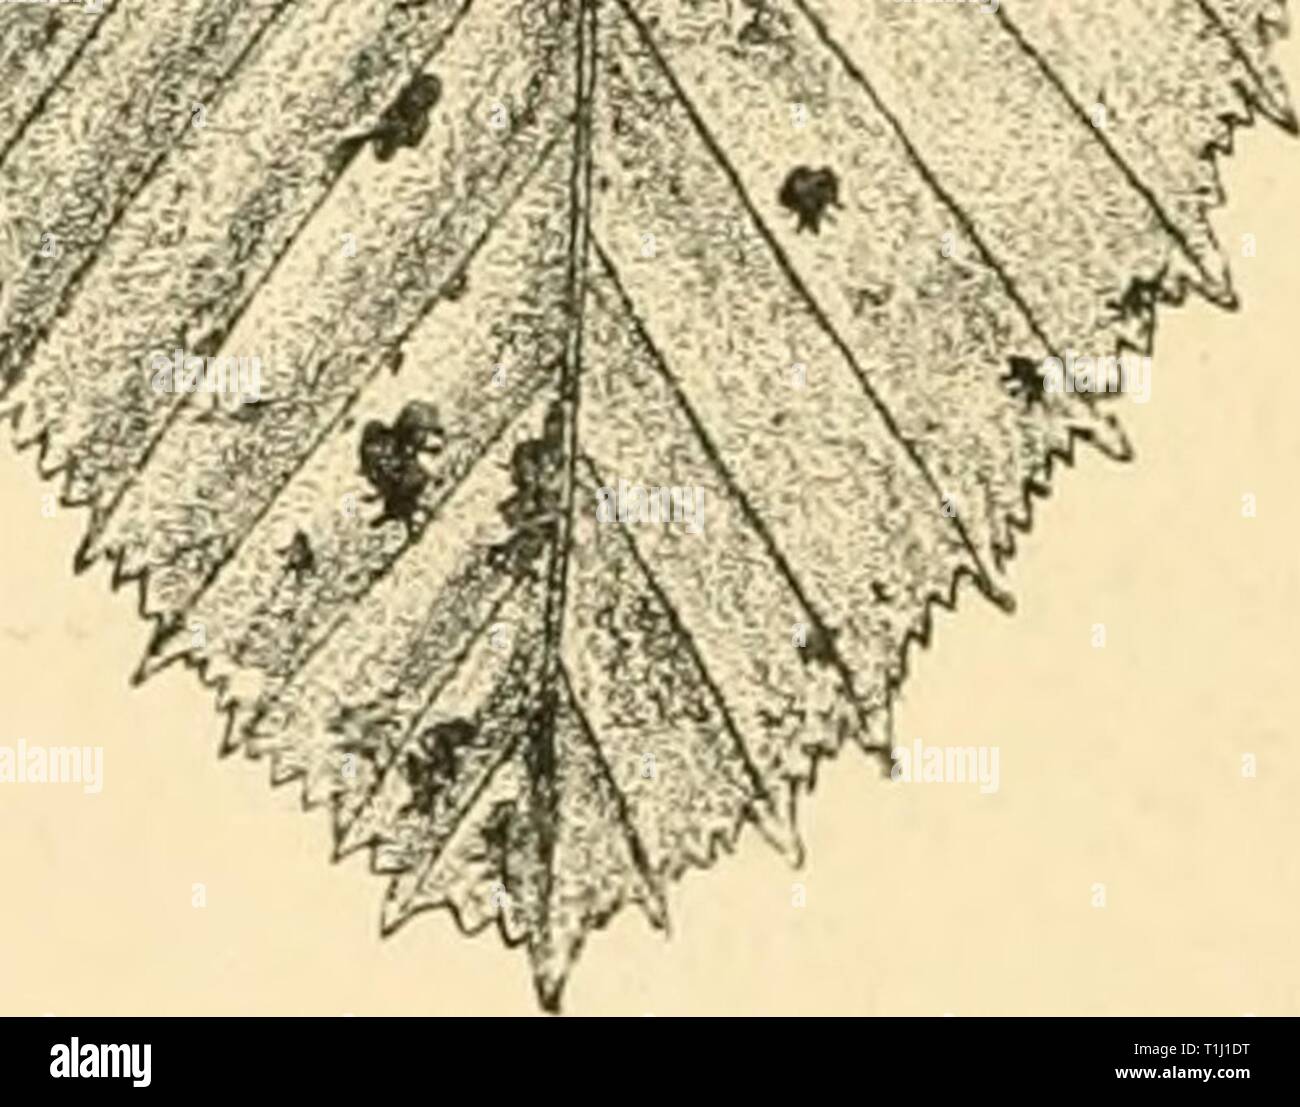 Diseases of plants induced by Diseases of plants induced by cryptogamic parasites; introduction to the study of pathogenic Fungi, slime-Fungi, bacteria, & Algae  diseasesofplants00tube Year: 1897  '-s;    Fio. lOS.—Mamiana fimhriala on Carpinus Setv.lv.s. Leaf of Hornbeam seen on lower surface. Stroma (enlarged), with the long black necks of the perithecia projecting from the ruptured leaf-epidermis, (v. Tubeuf del.) Valsa. A stroma is generally present, but is of very variable appear- ance ; embedded in it are the perithecia, with only their beak- like mouths projecting. The spores are hyalin Stock Photo